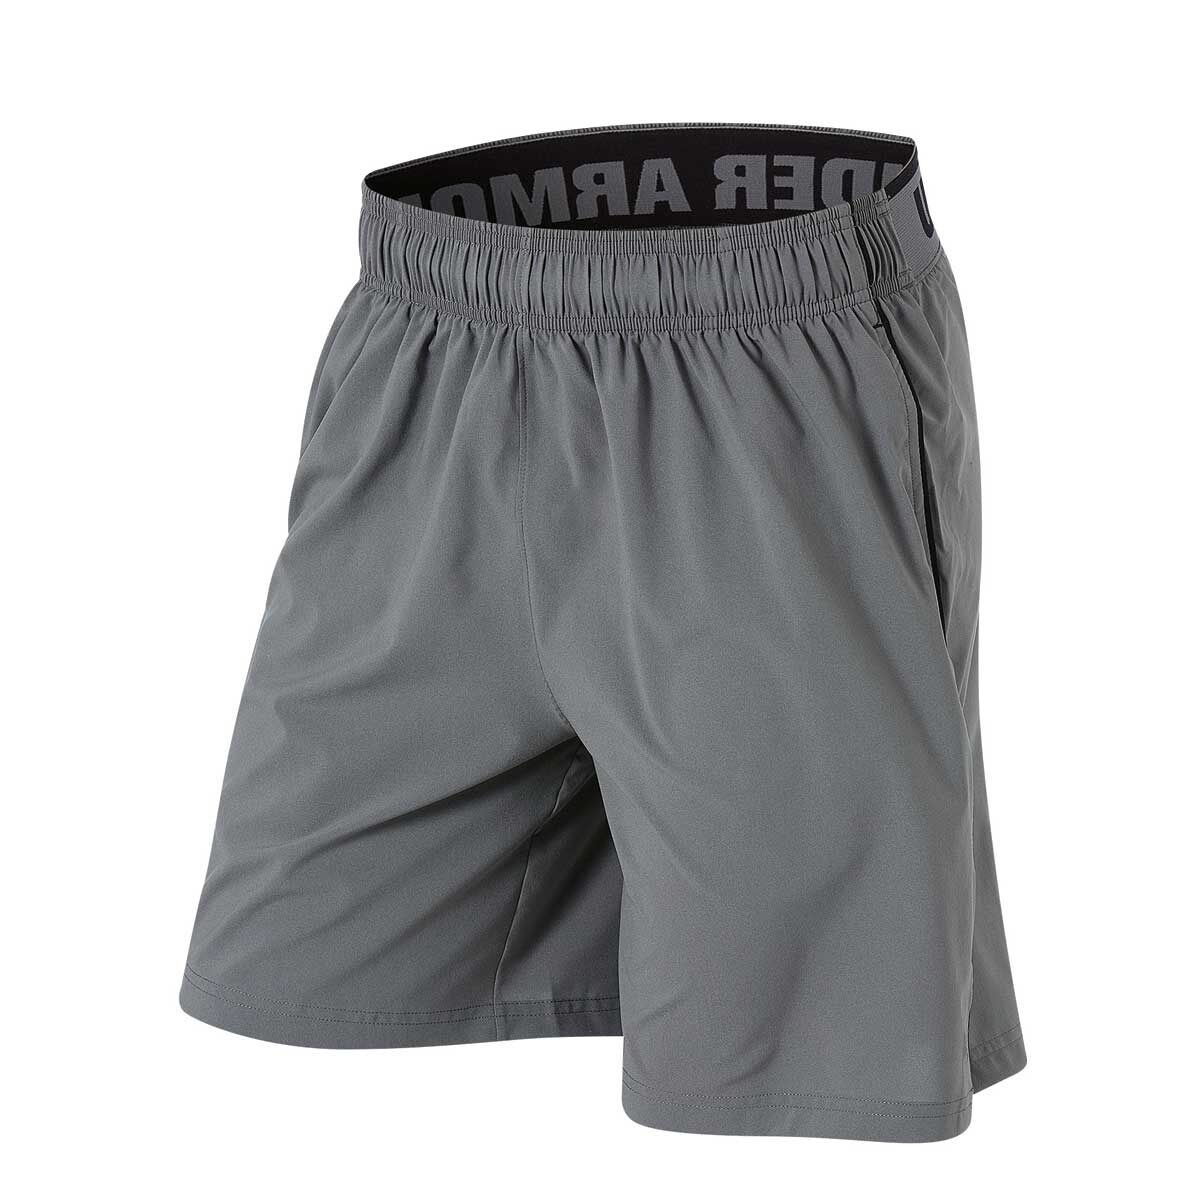 rn 96510 under armour shorts